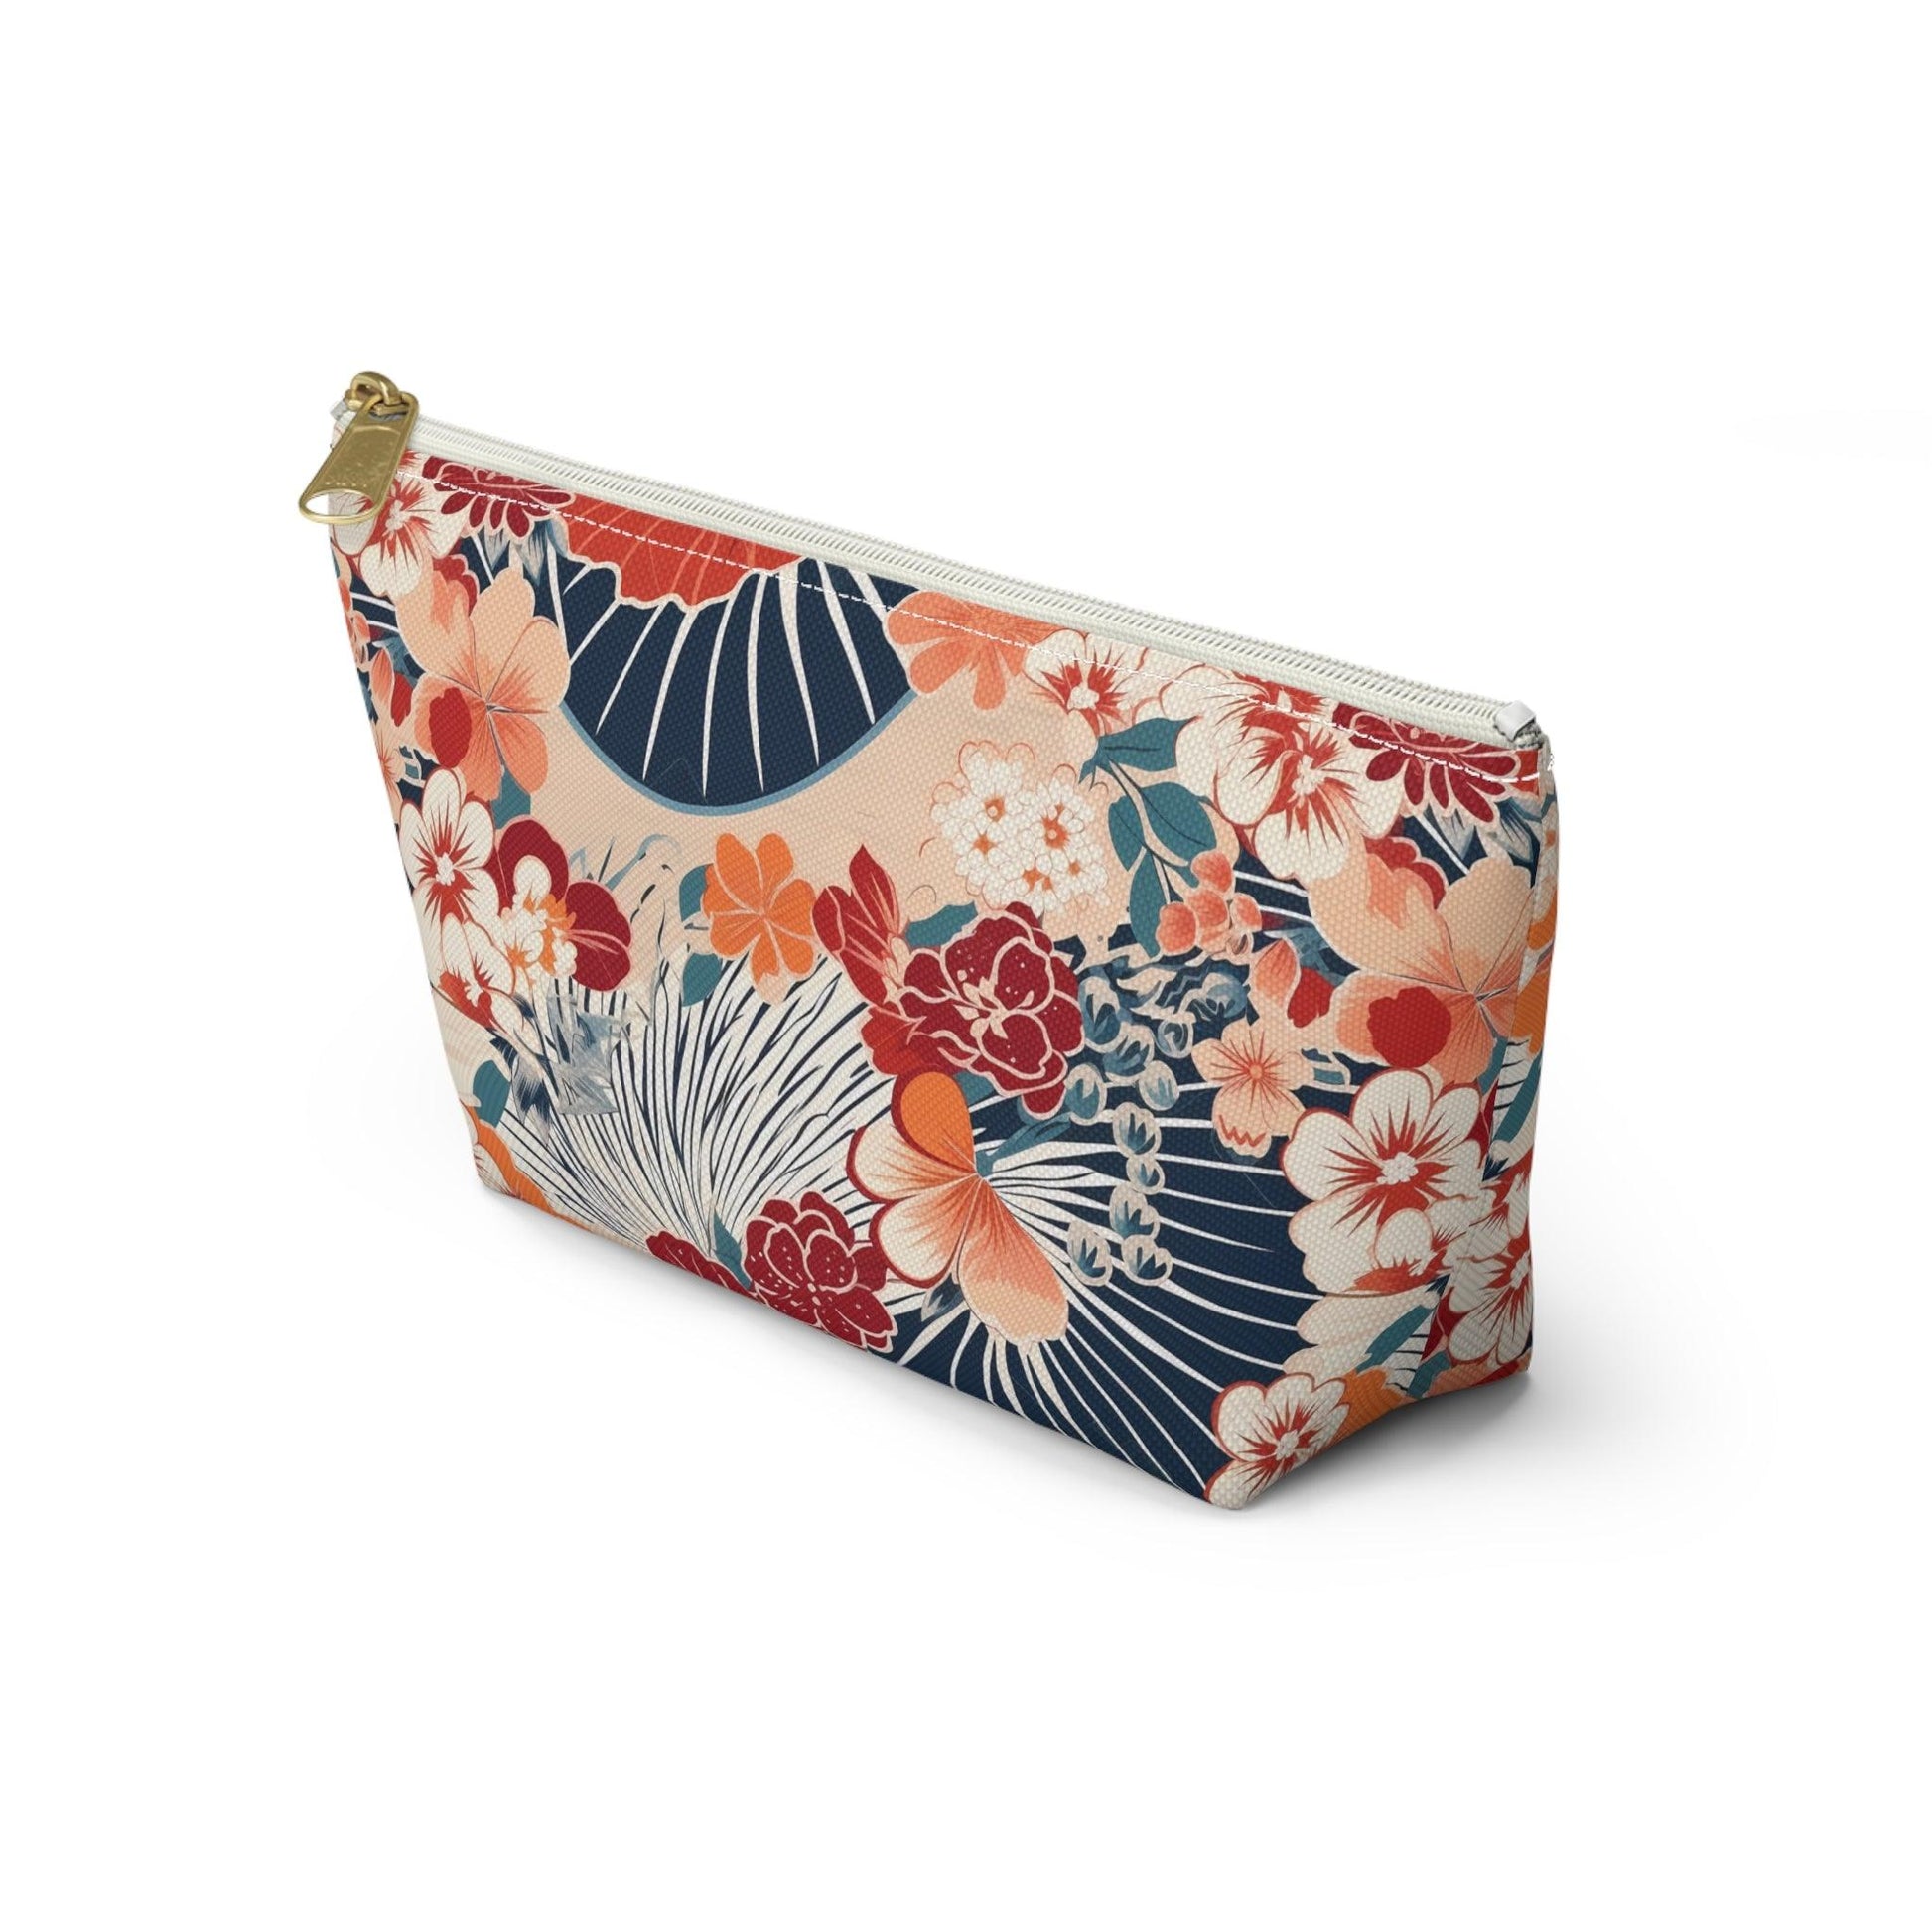 Japanese Origami Pouch - The Global Wanderer